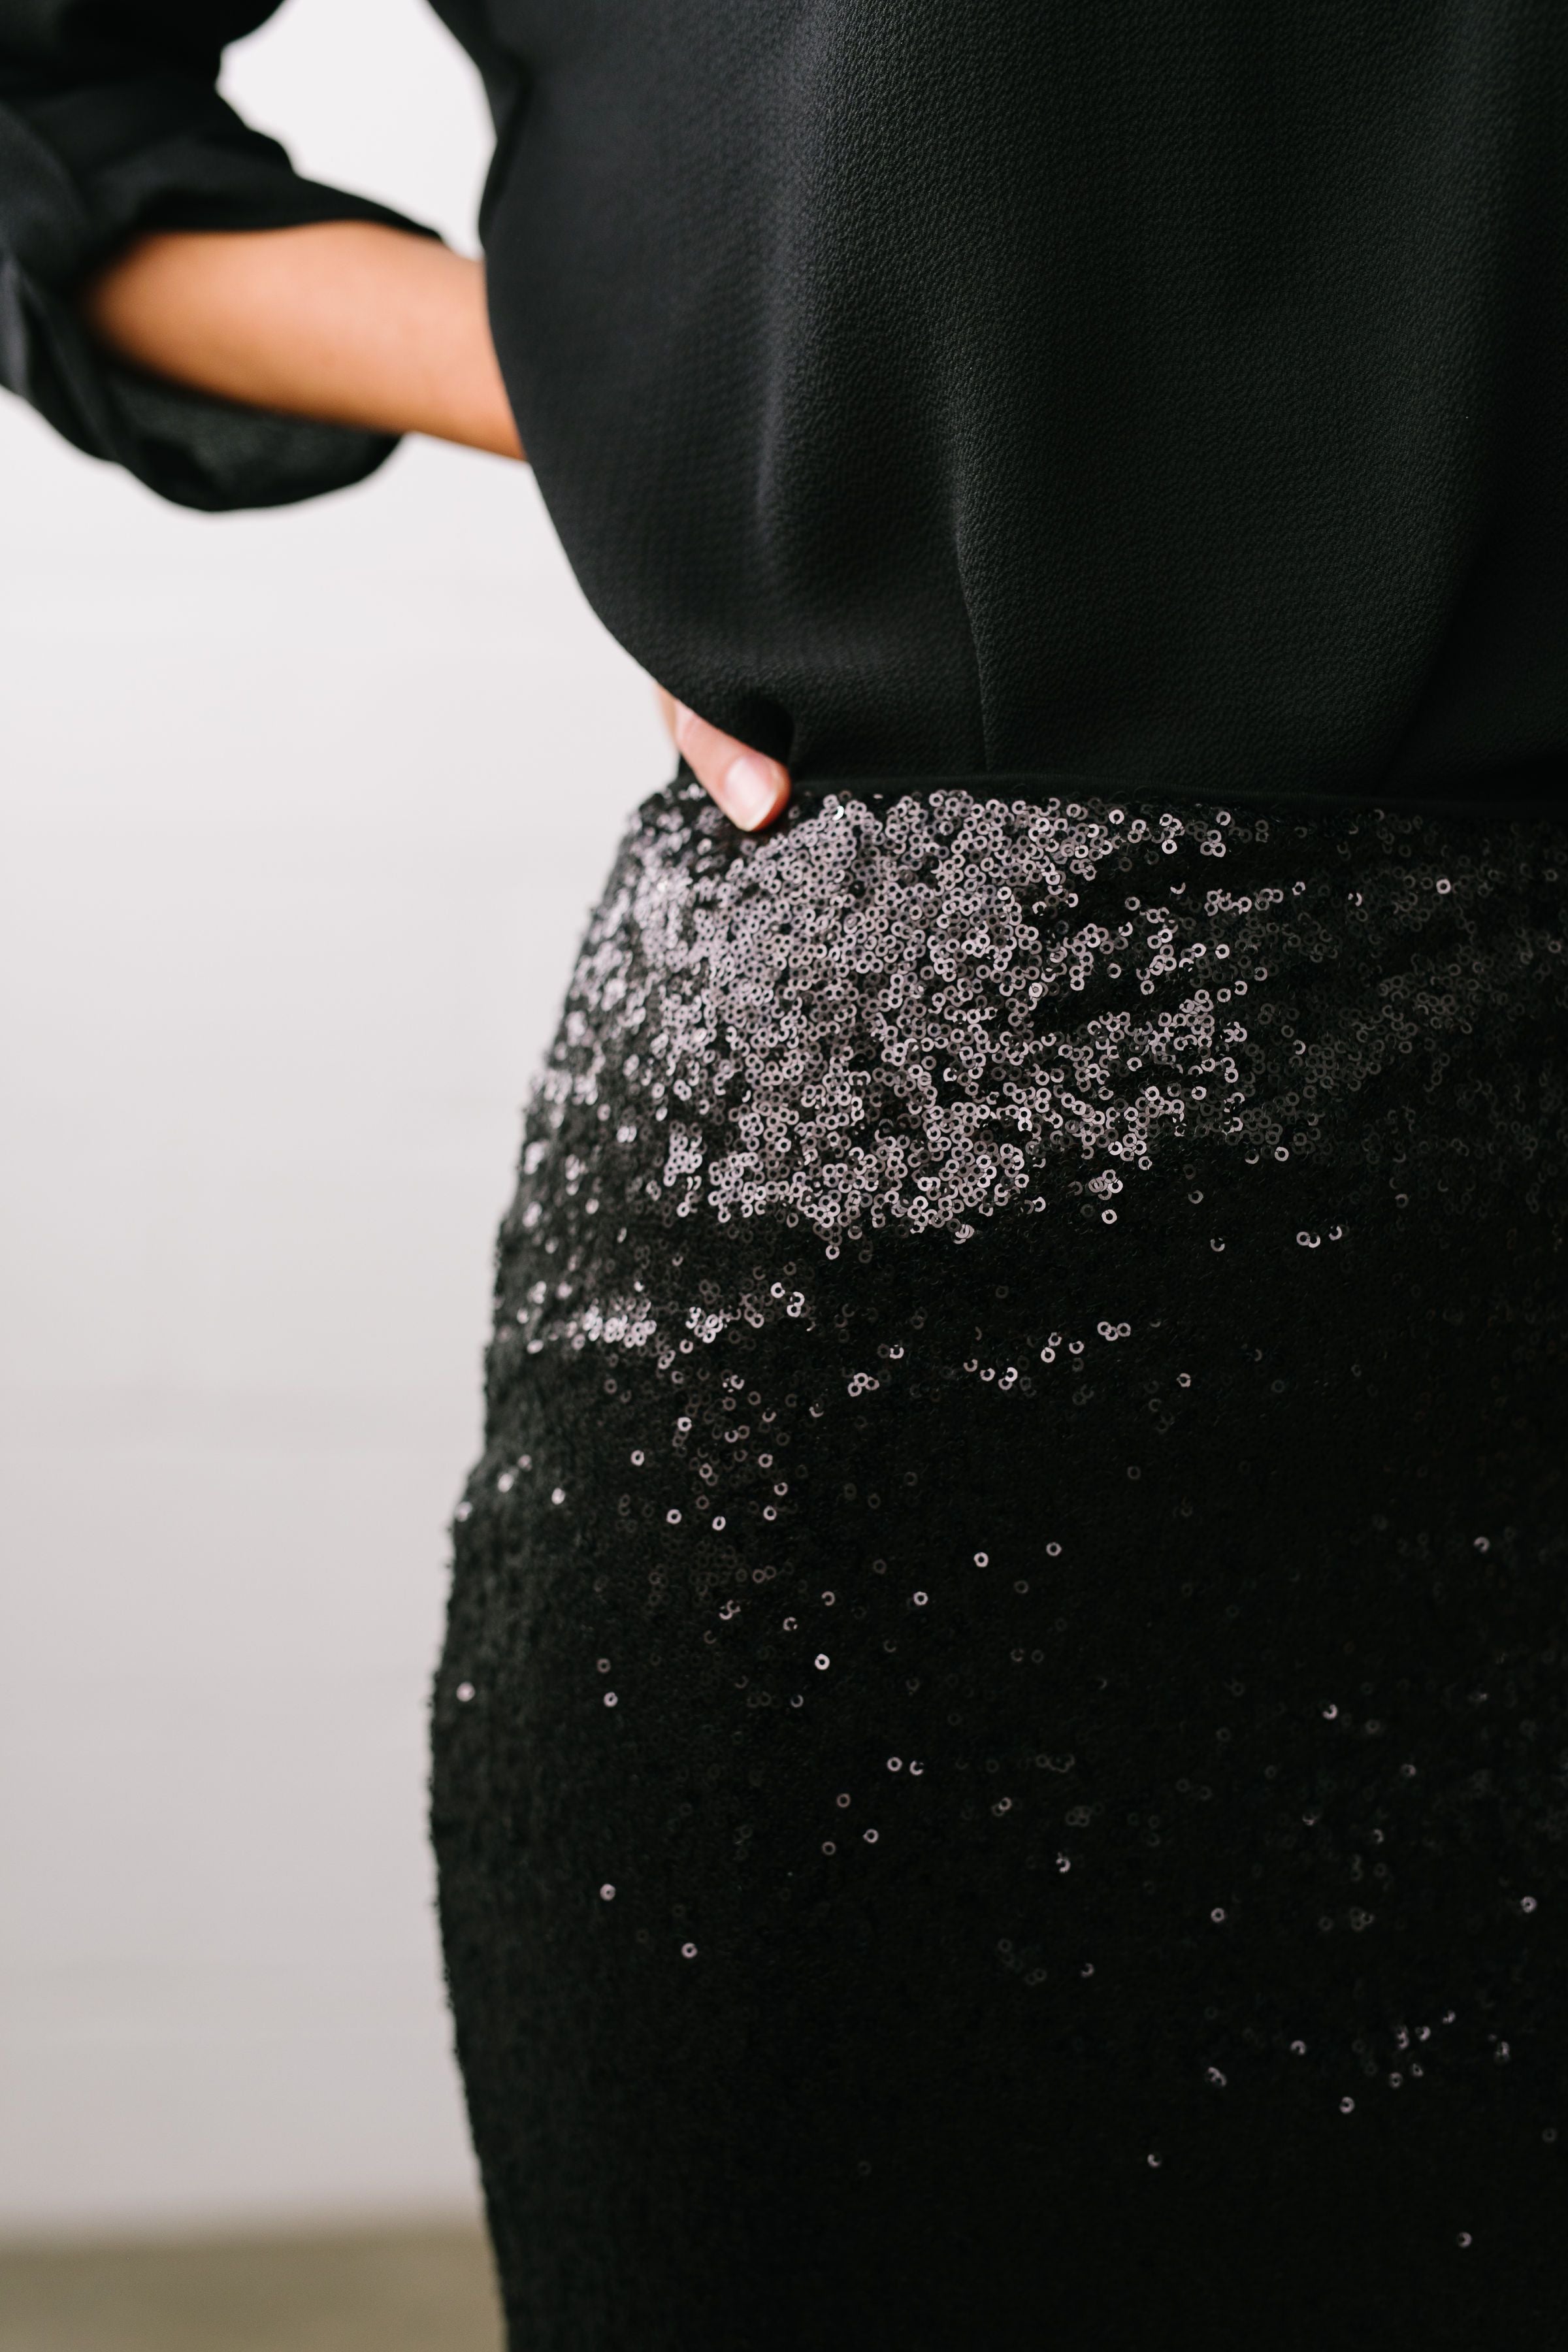 Born To Shine Sequined Pencil Skirt In Black - ALL SALES FINAL